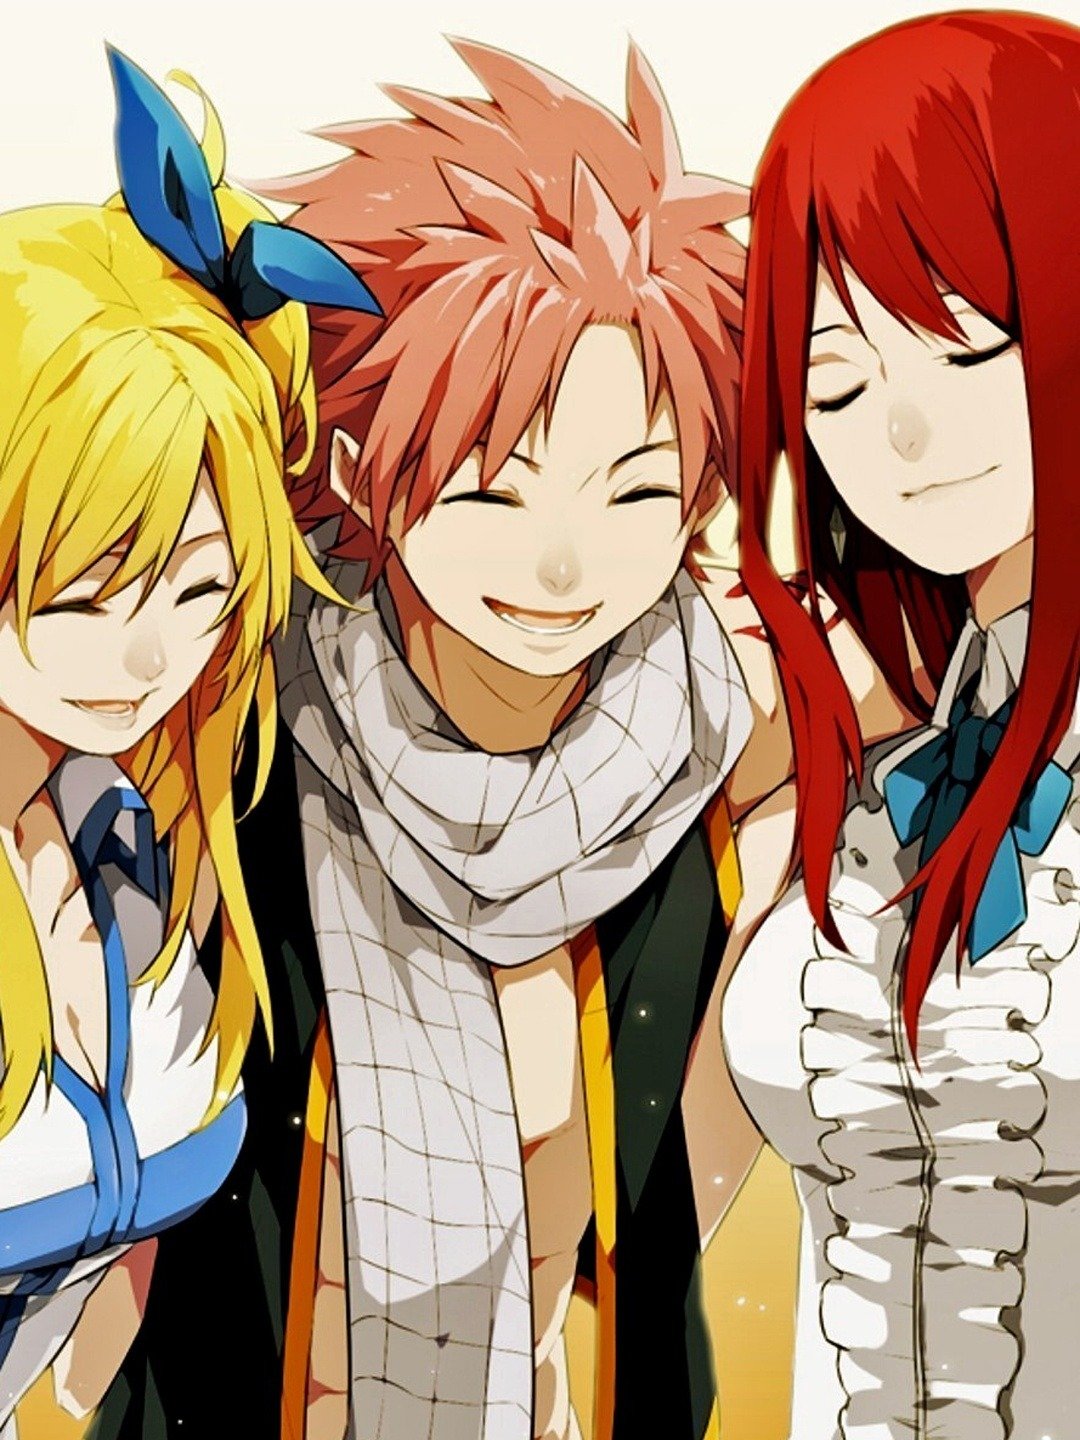 15 Anime To Watch If You Love Fairy Tail